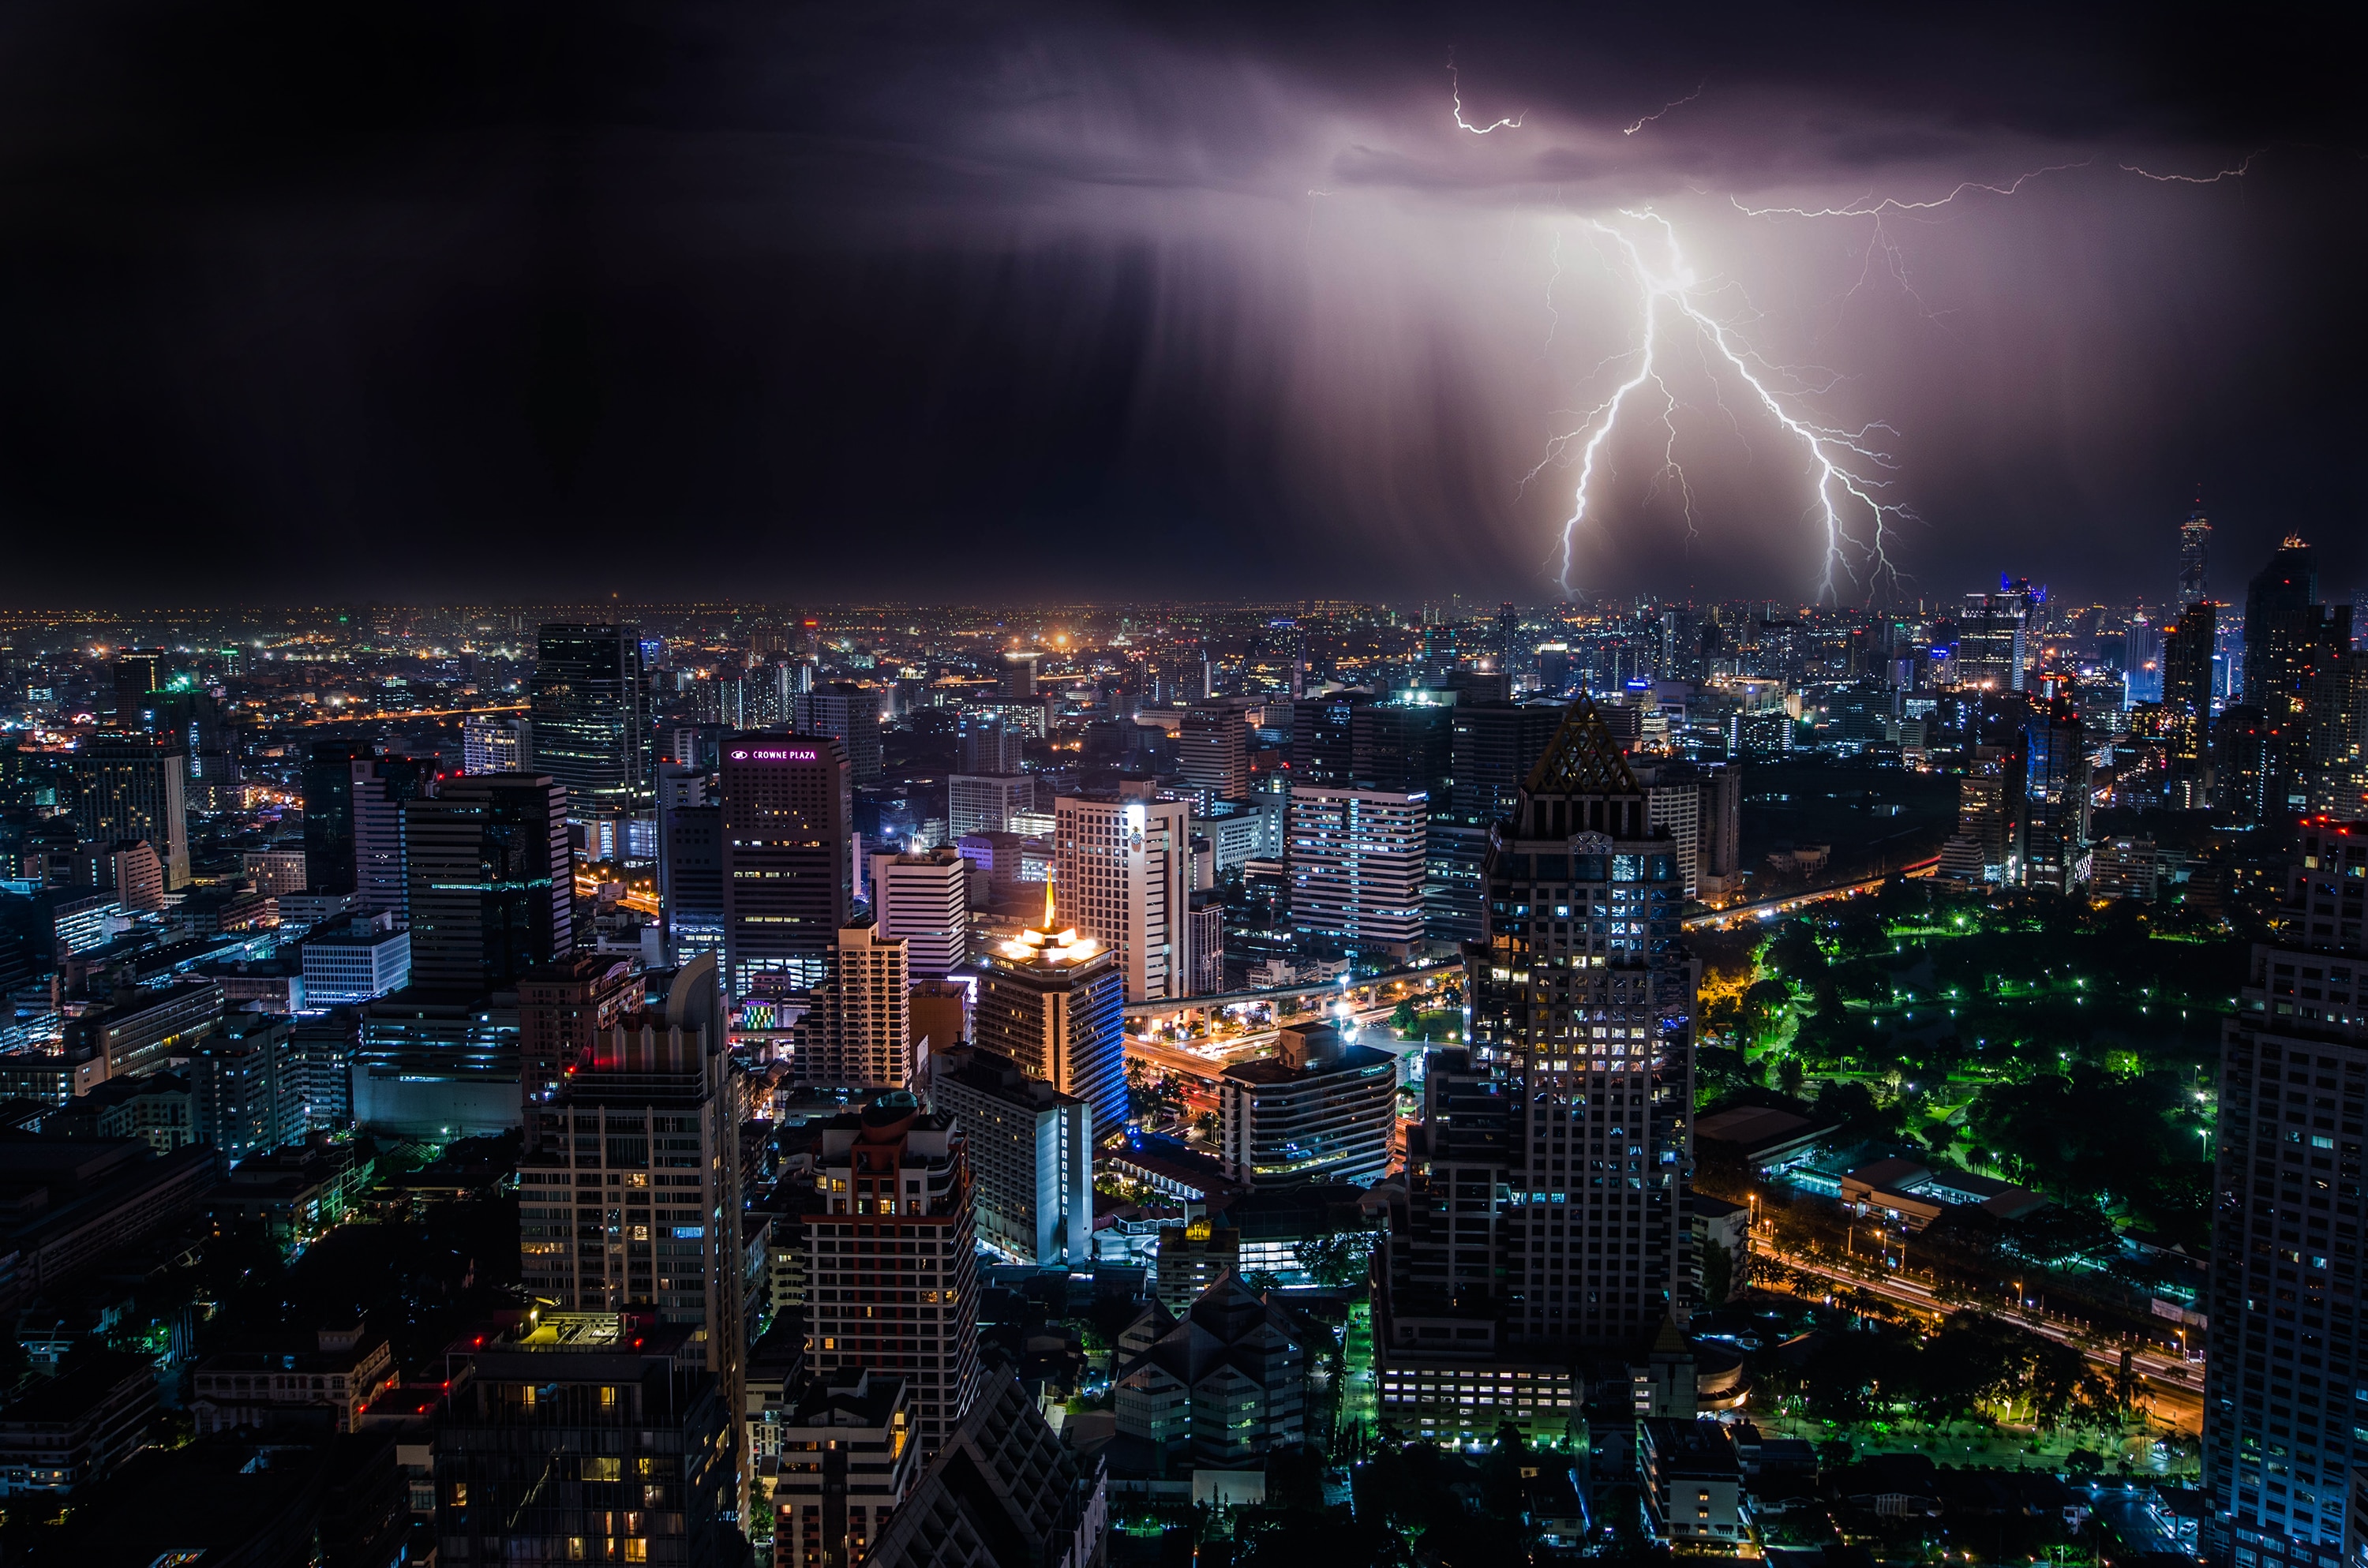 city with buildings under dark clouds with lightning